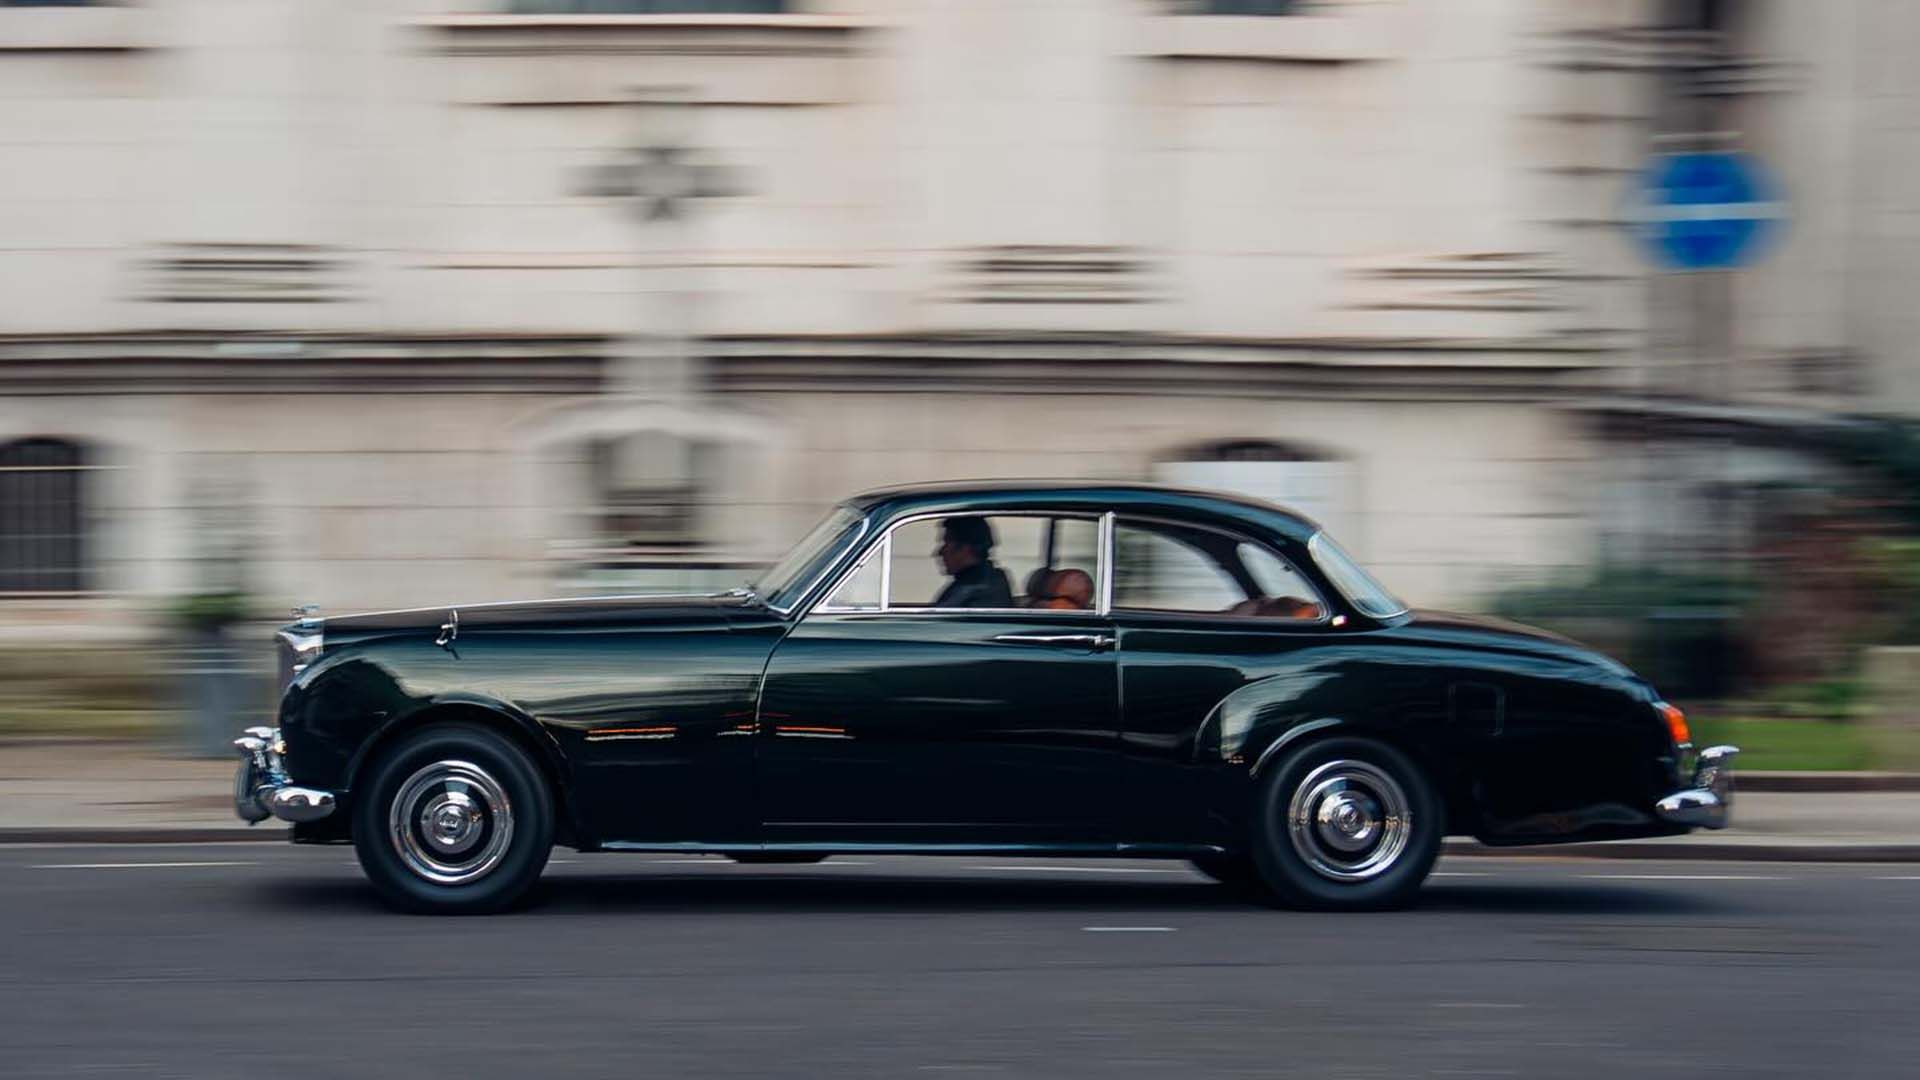 1962 Bentley S2 Continental, converted to EV by Lunaz Design, profile view in motion